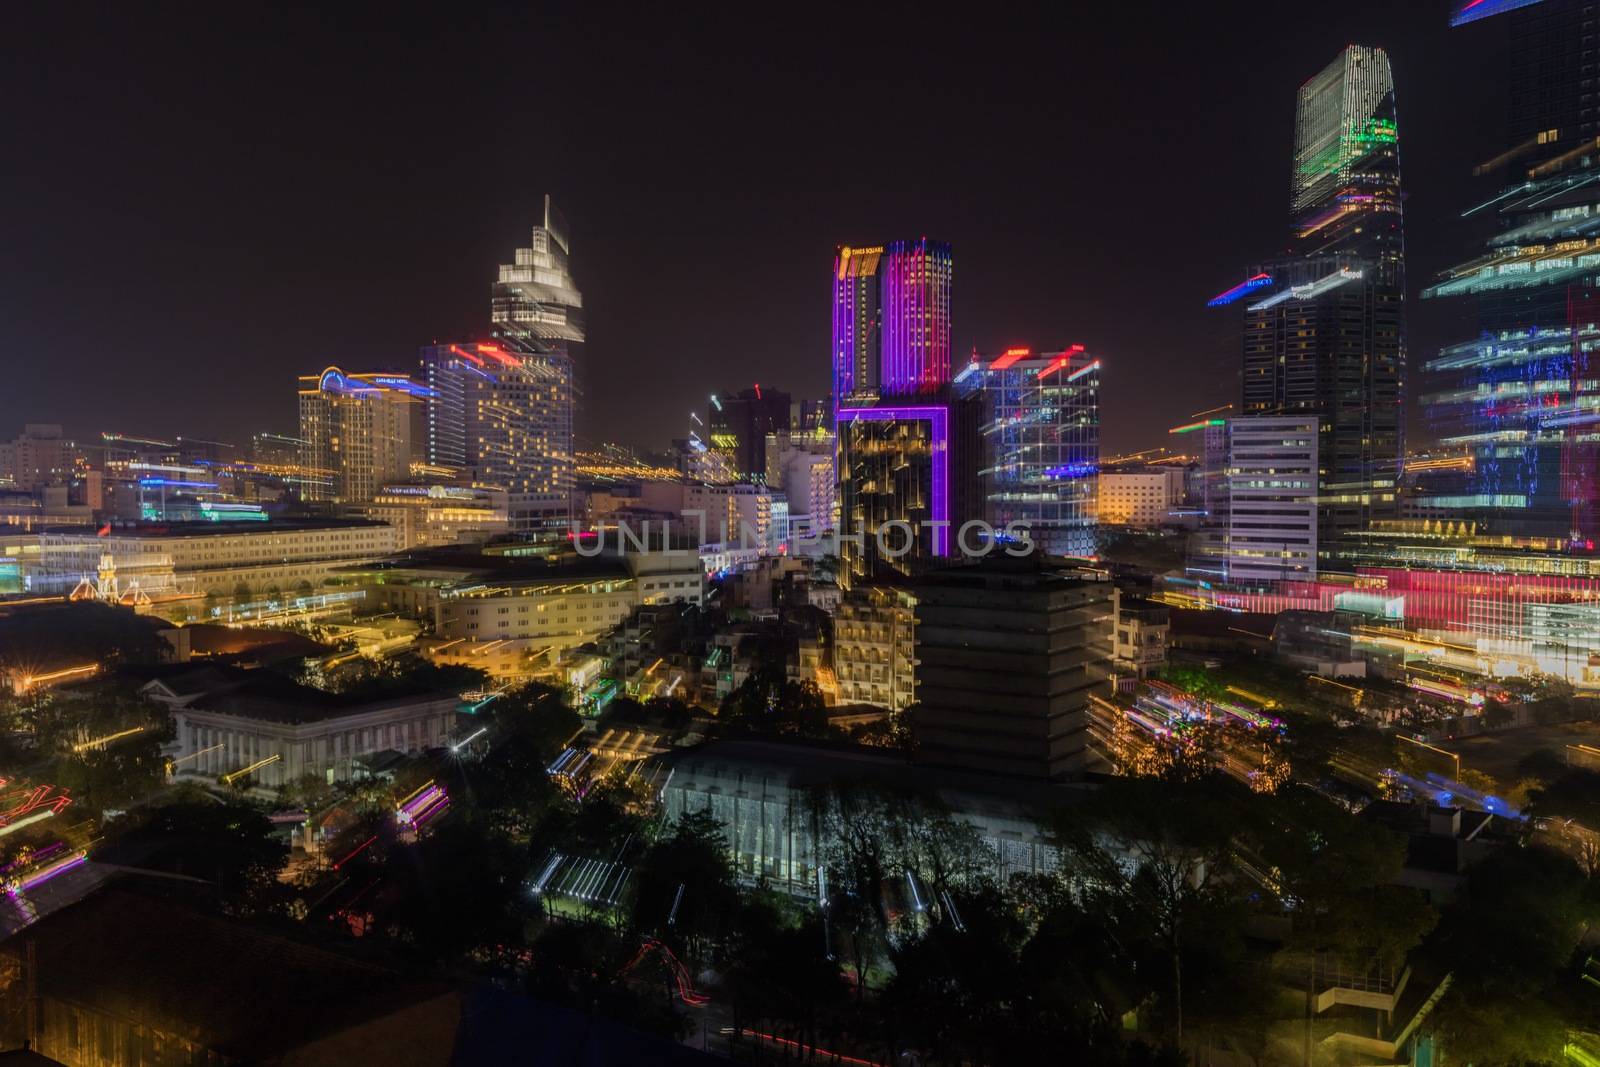 Saigon, Ho Chi Minh, Vietnam, Asia, 29 January 2018- Zooming skyline view of the capital city Ho Chi Minh at night with the colourful city lights ablaze.